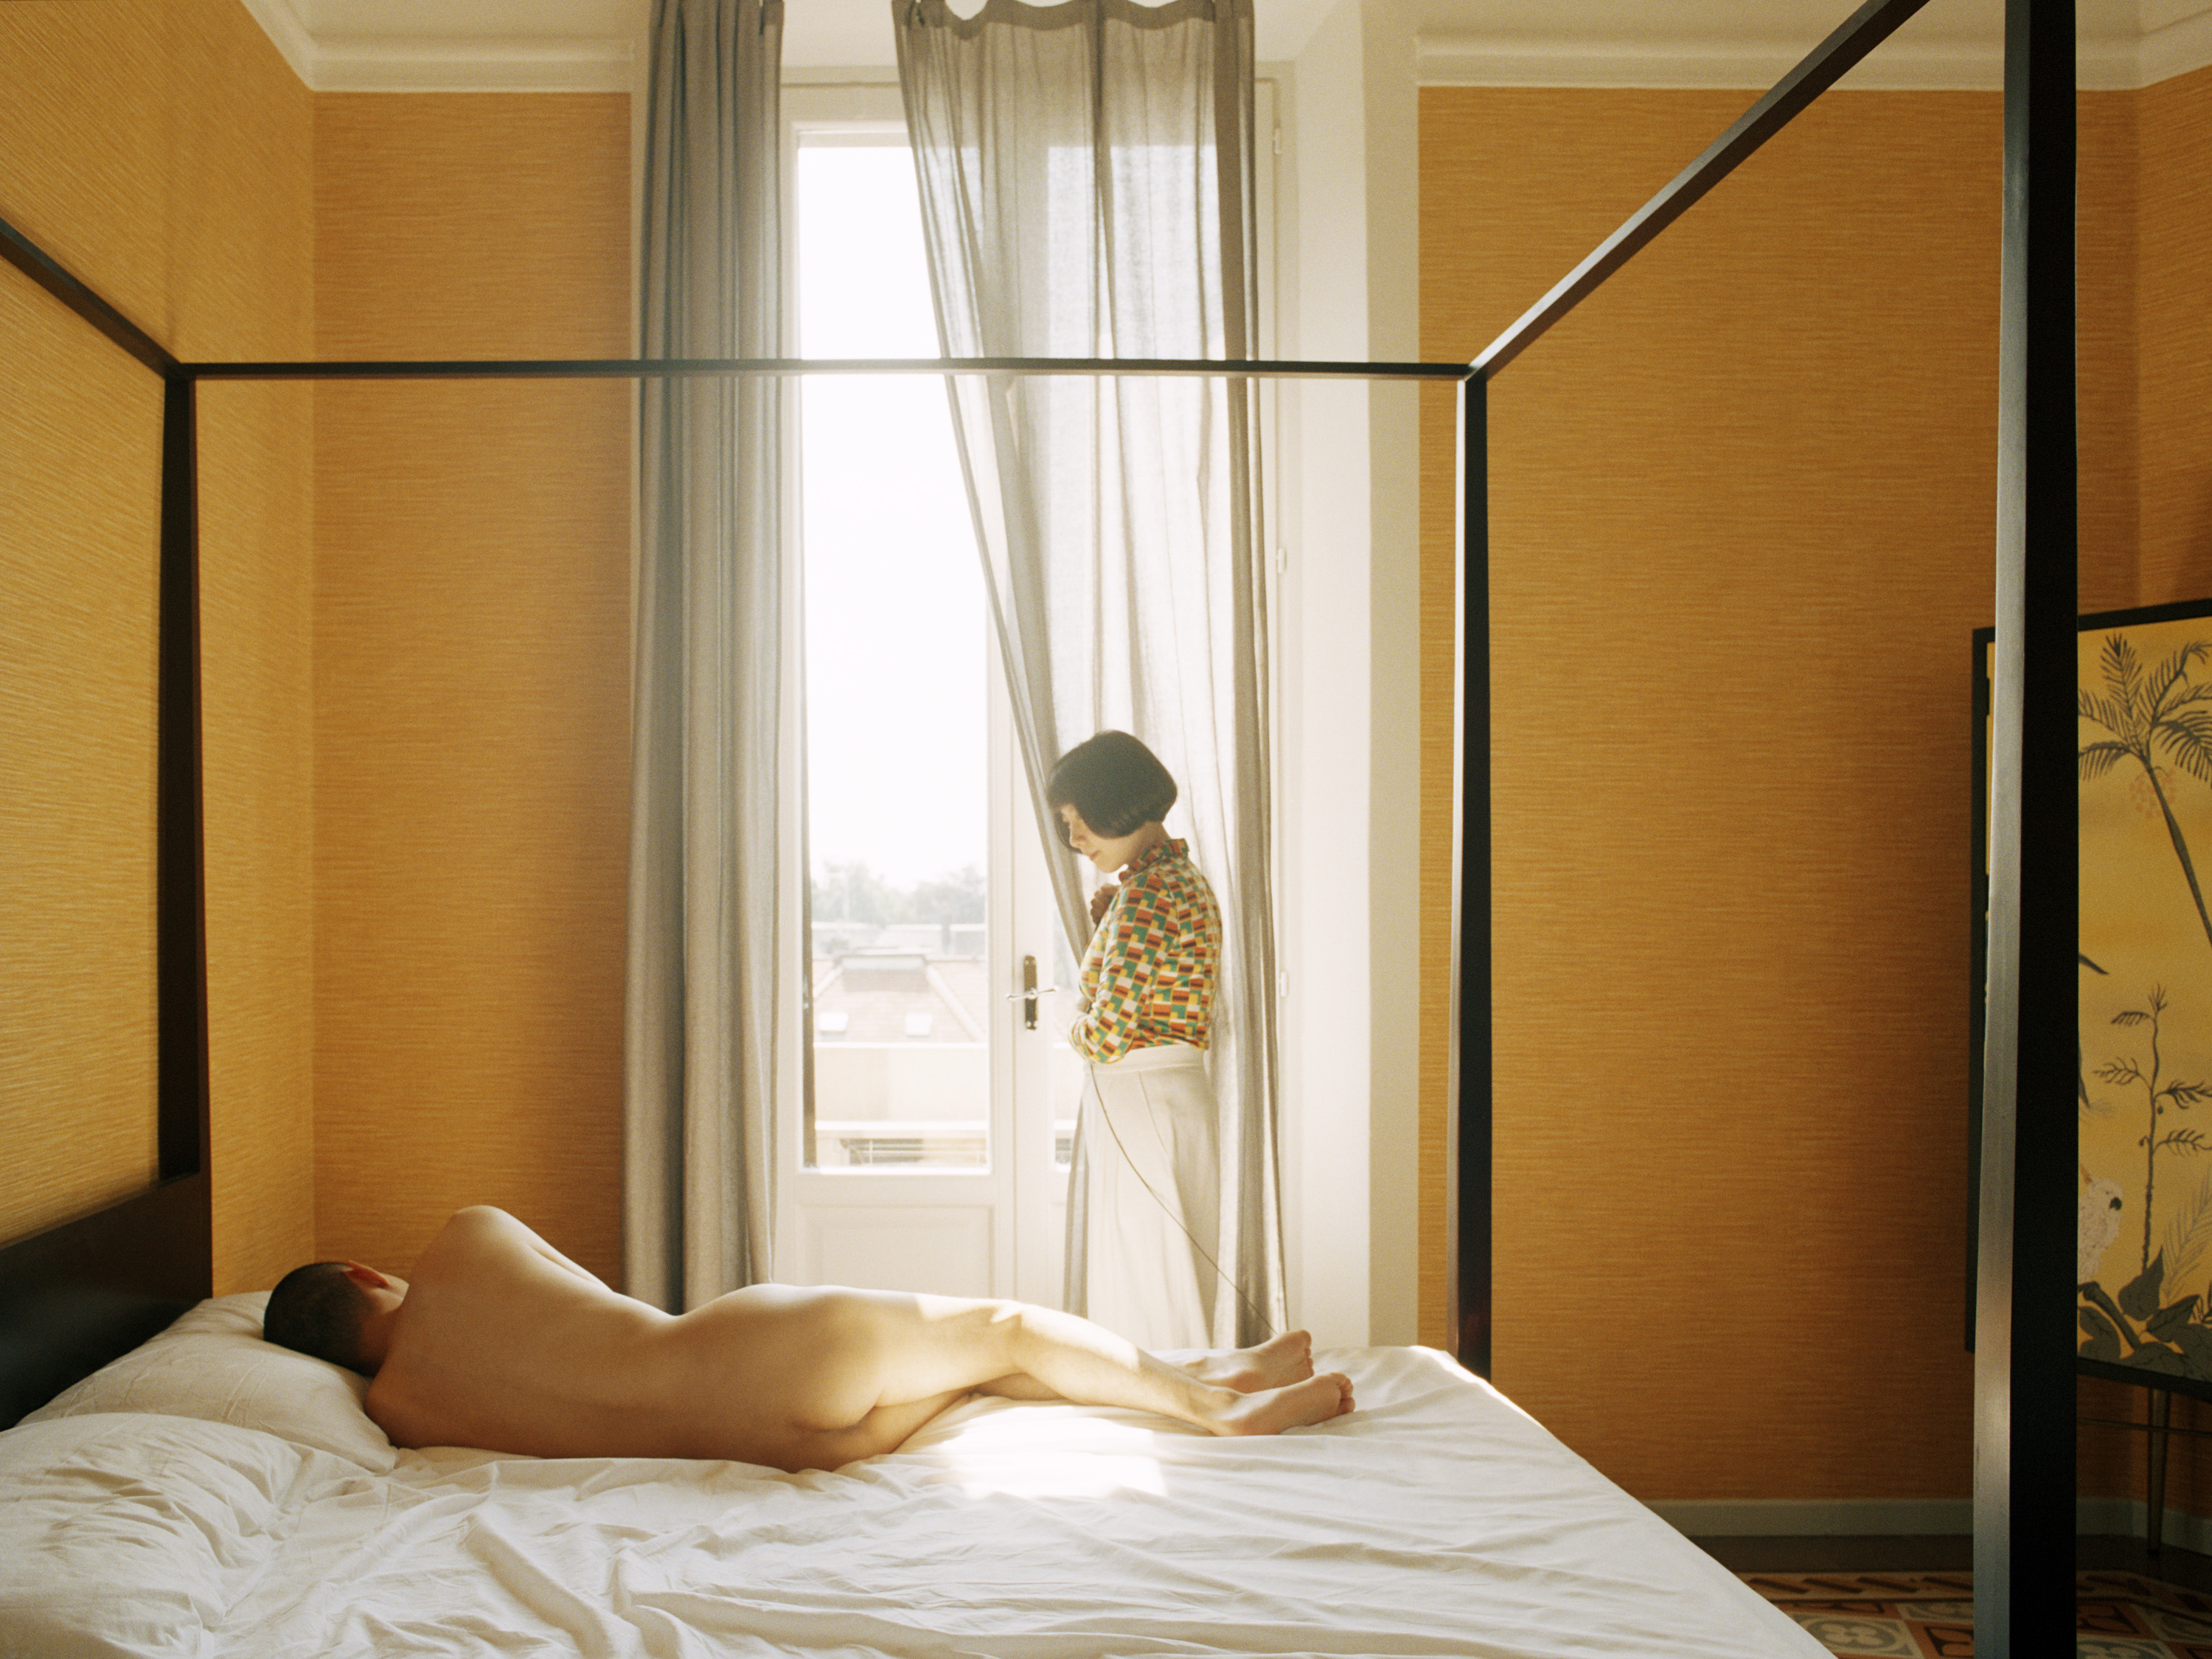 A naked Japanese man lies on a four-poster bed in a yellow hotel room. A Chinese woman in a patterned shirt and white pants s